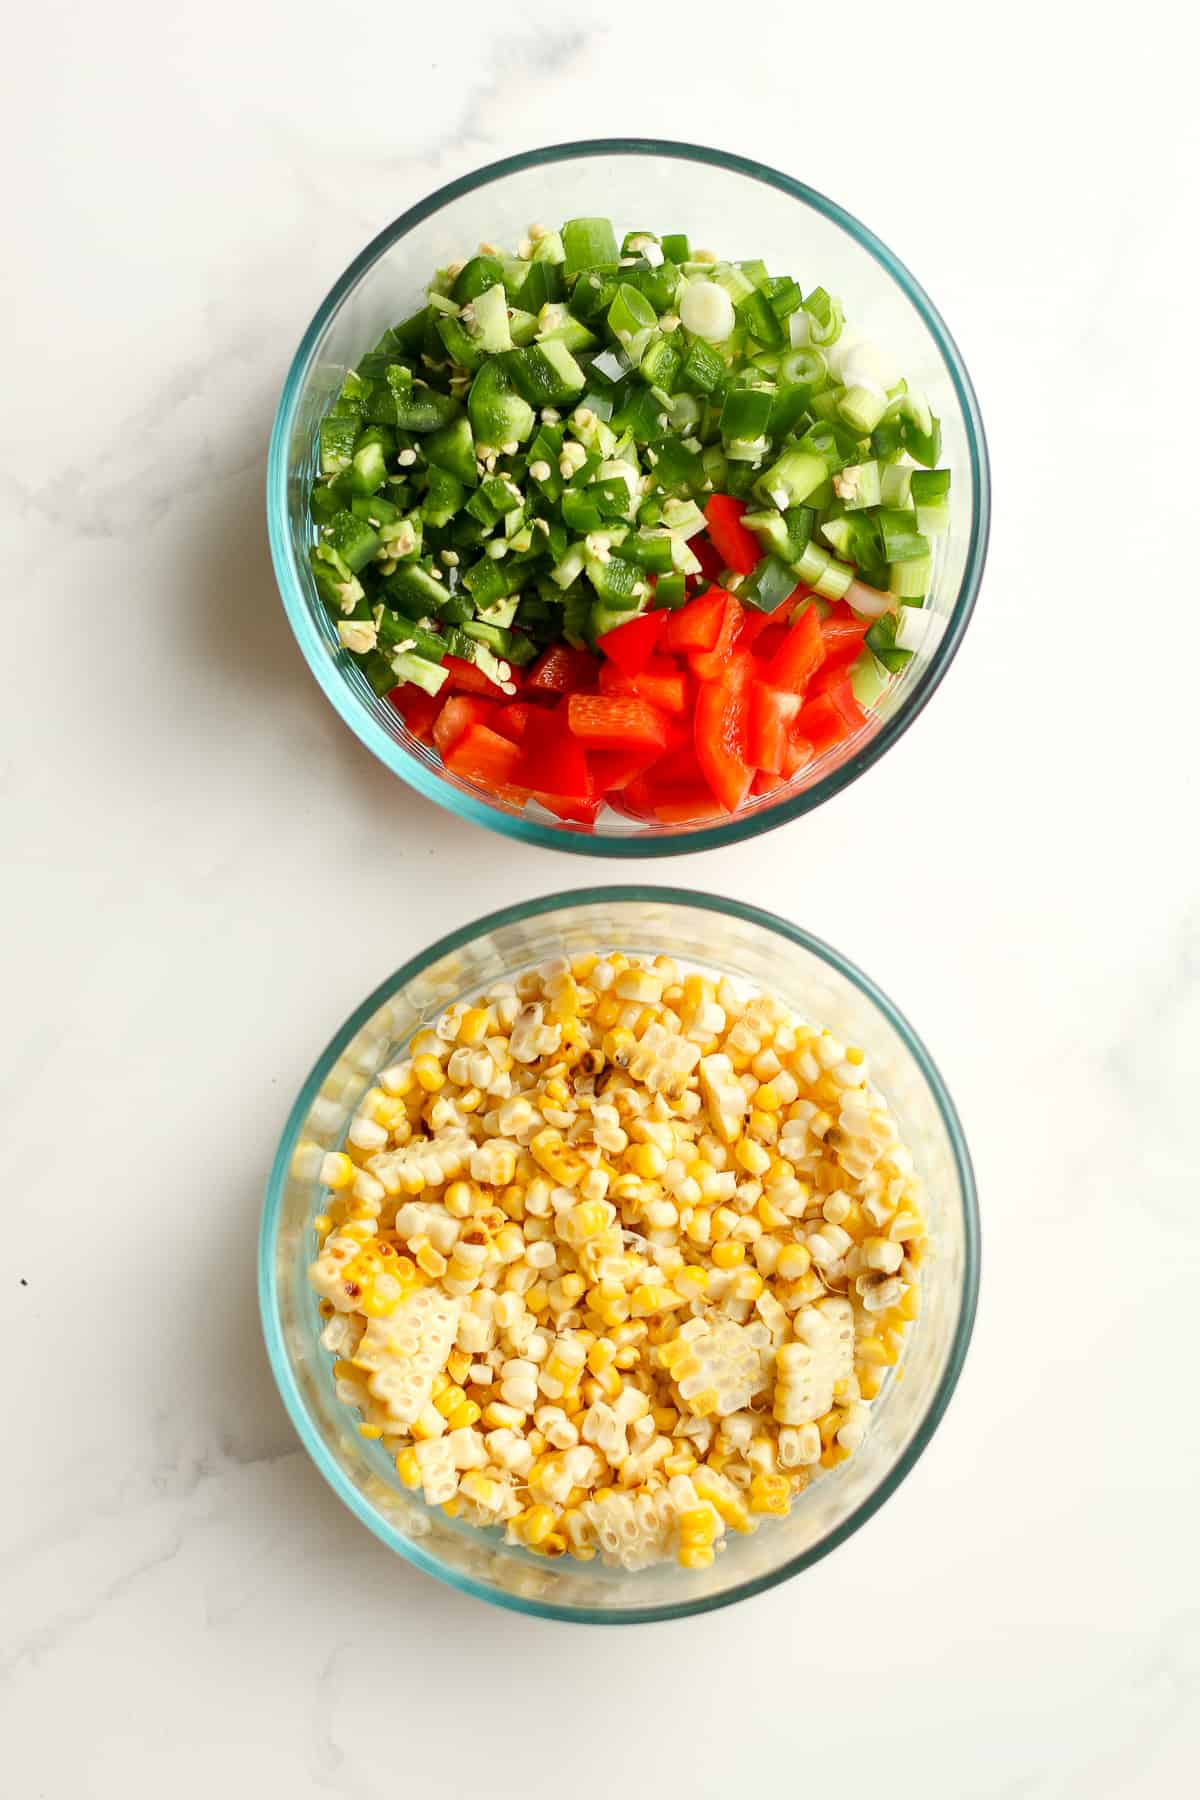 Two bowls - one with the raw veggies and another with the cooked corn kernels.